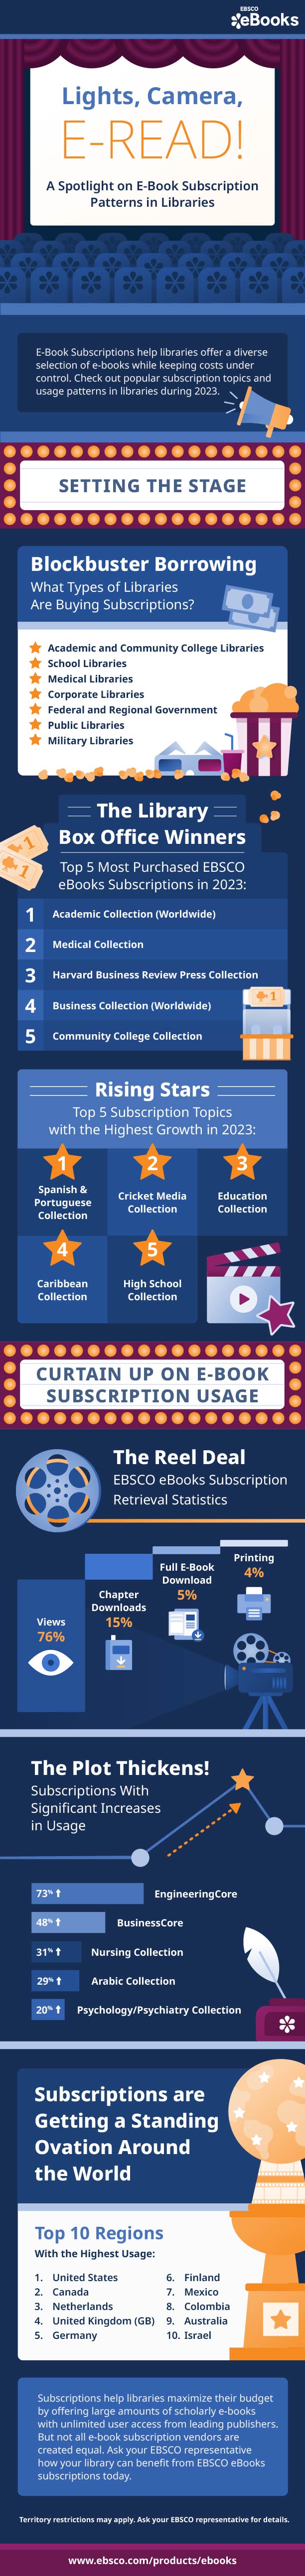 Popular e-book subscription topics and usage patterns in libraries during 2023